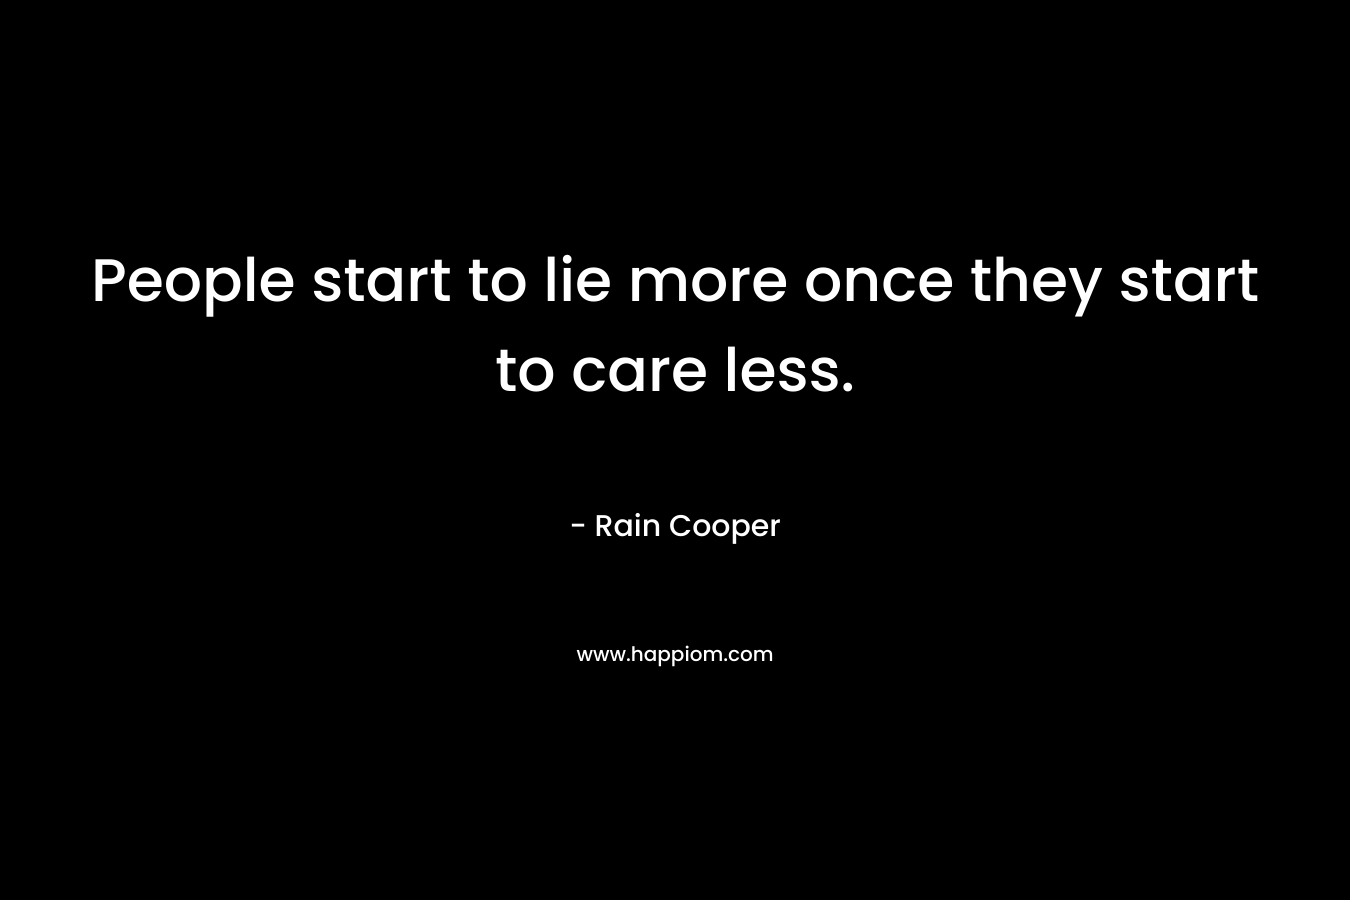 People start to lie more once they start to care less.